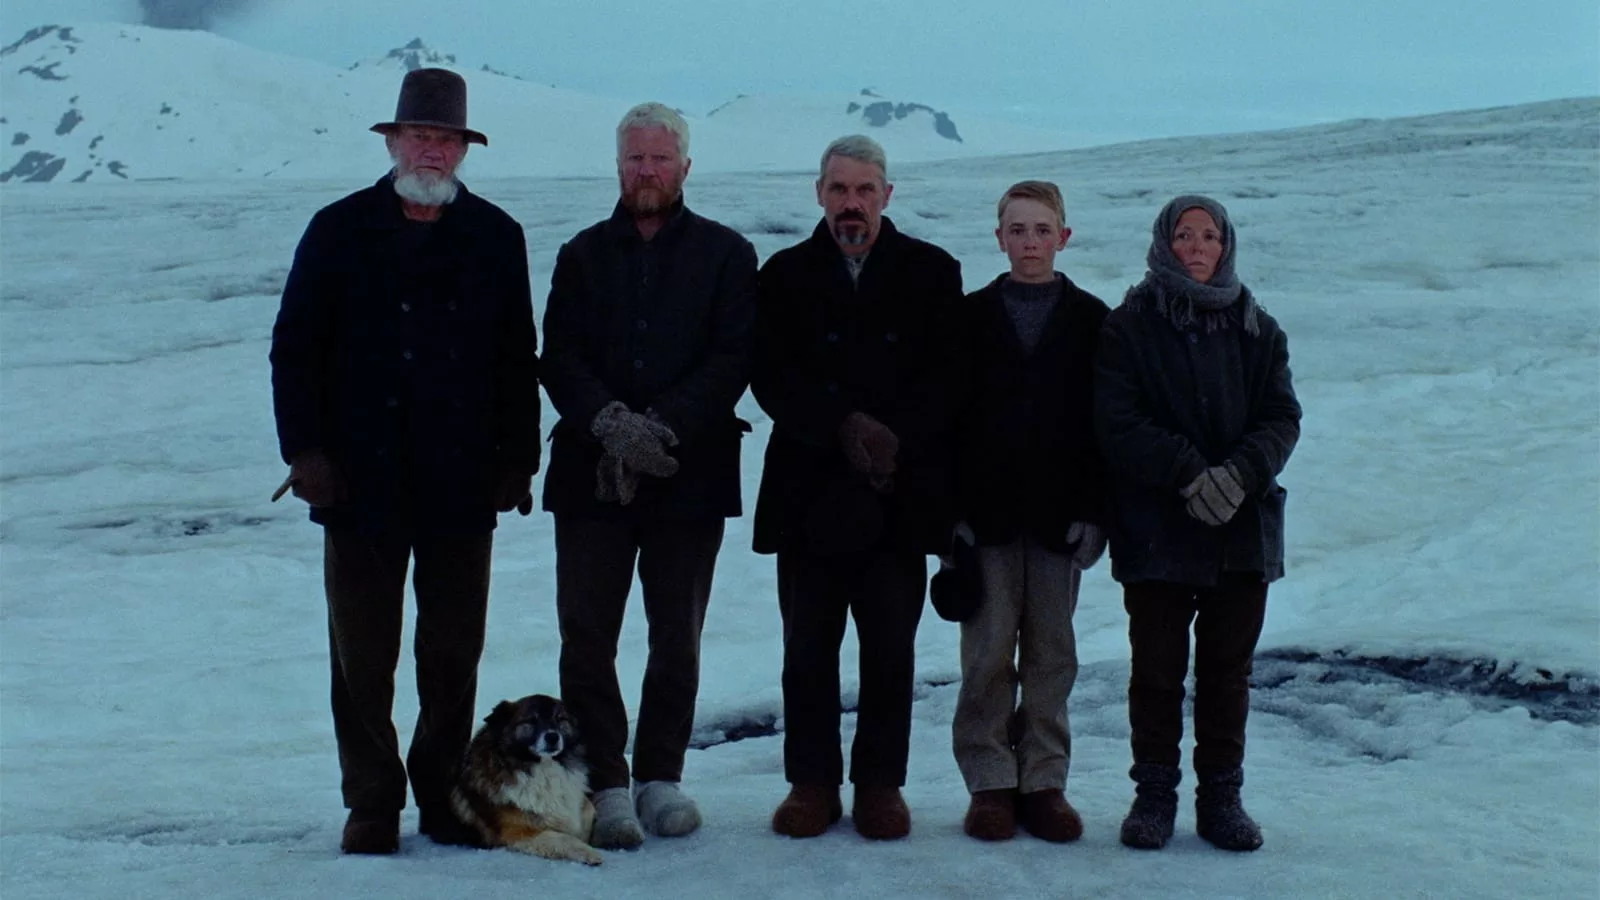 3 men, 1 child, 1 woman, all dressed in early 20th Century garb and a dog stand on a desolate ice field with mountains in the background